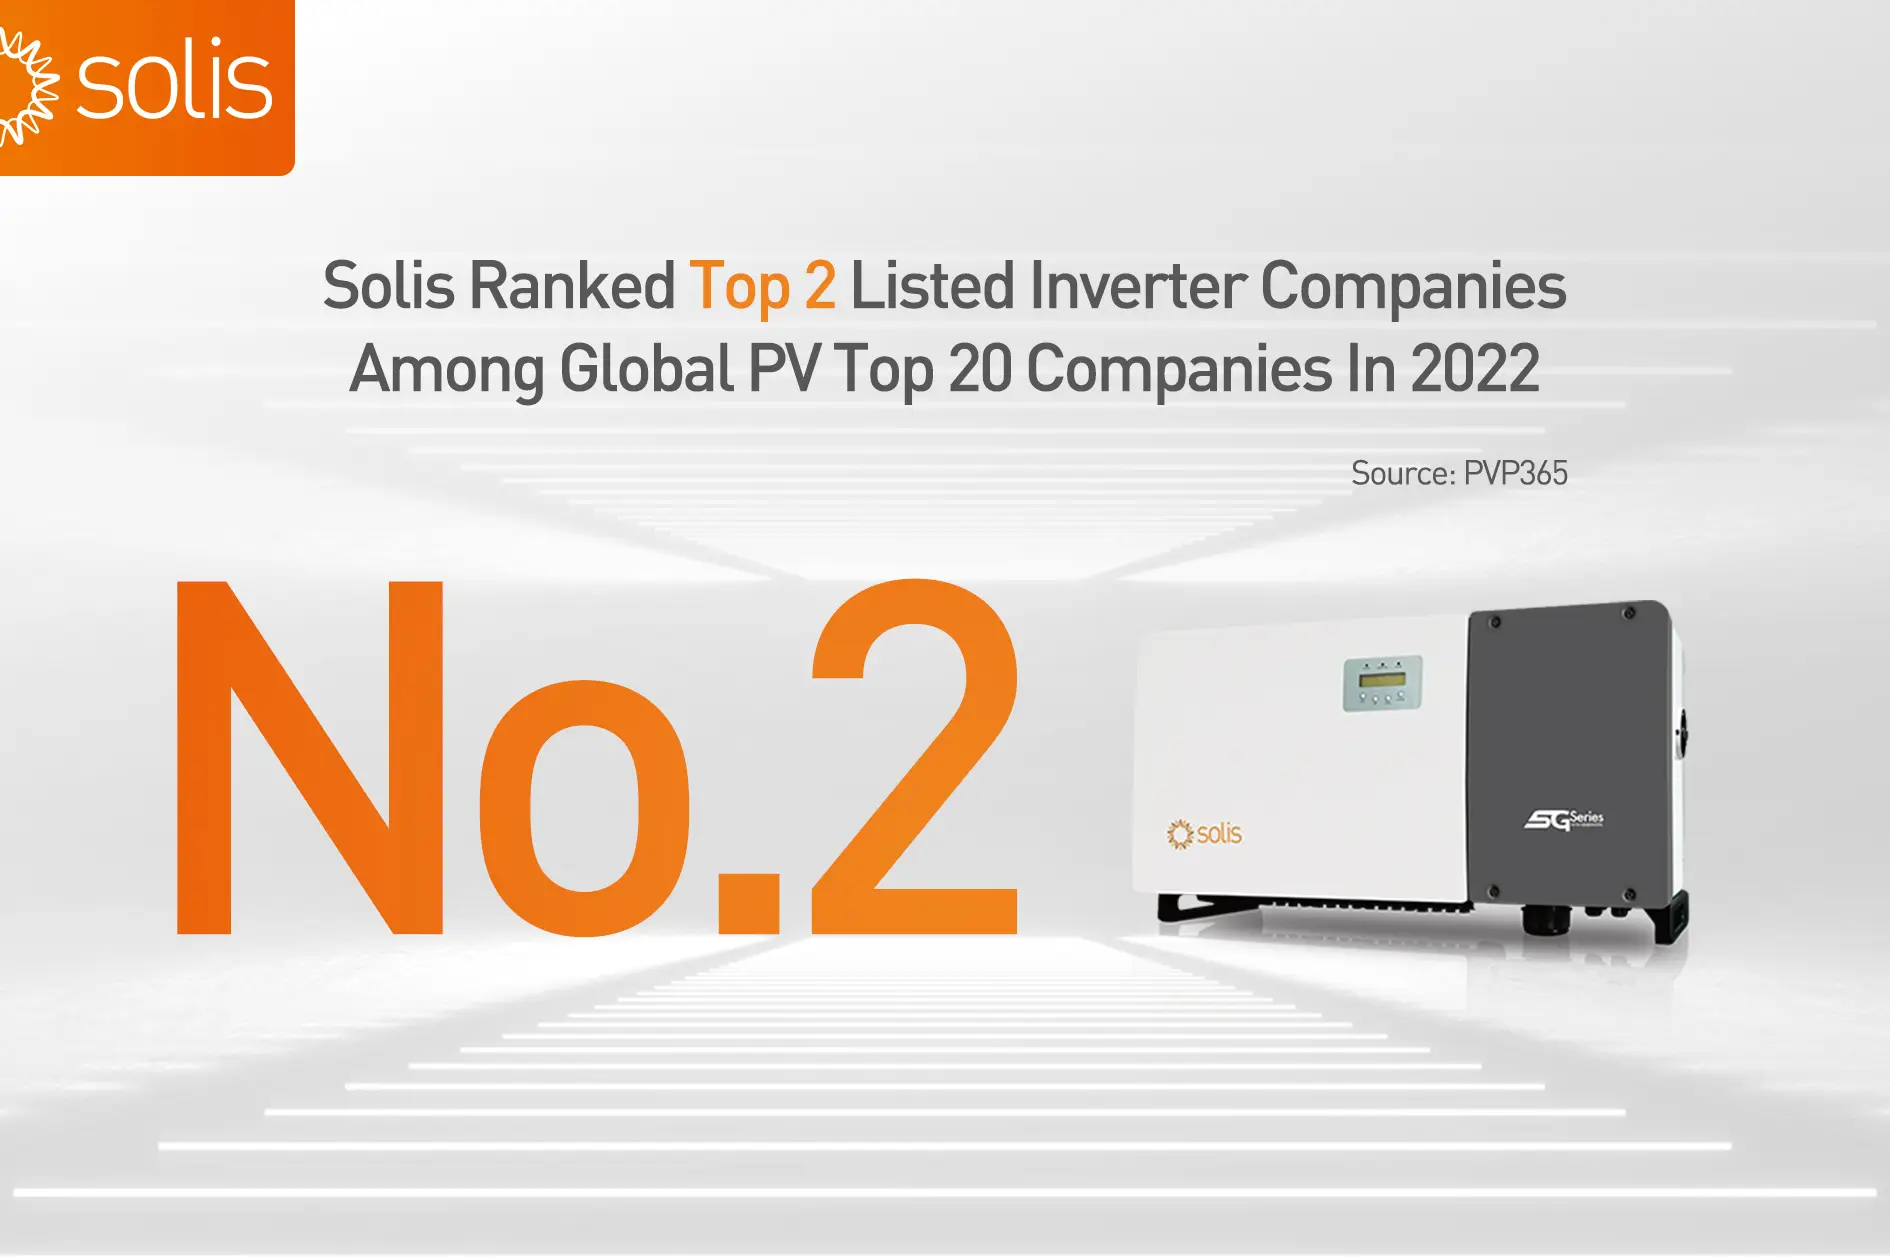 Solis Ranked Top 2 For Inverters